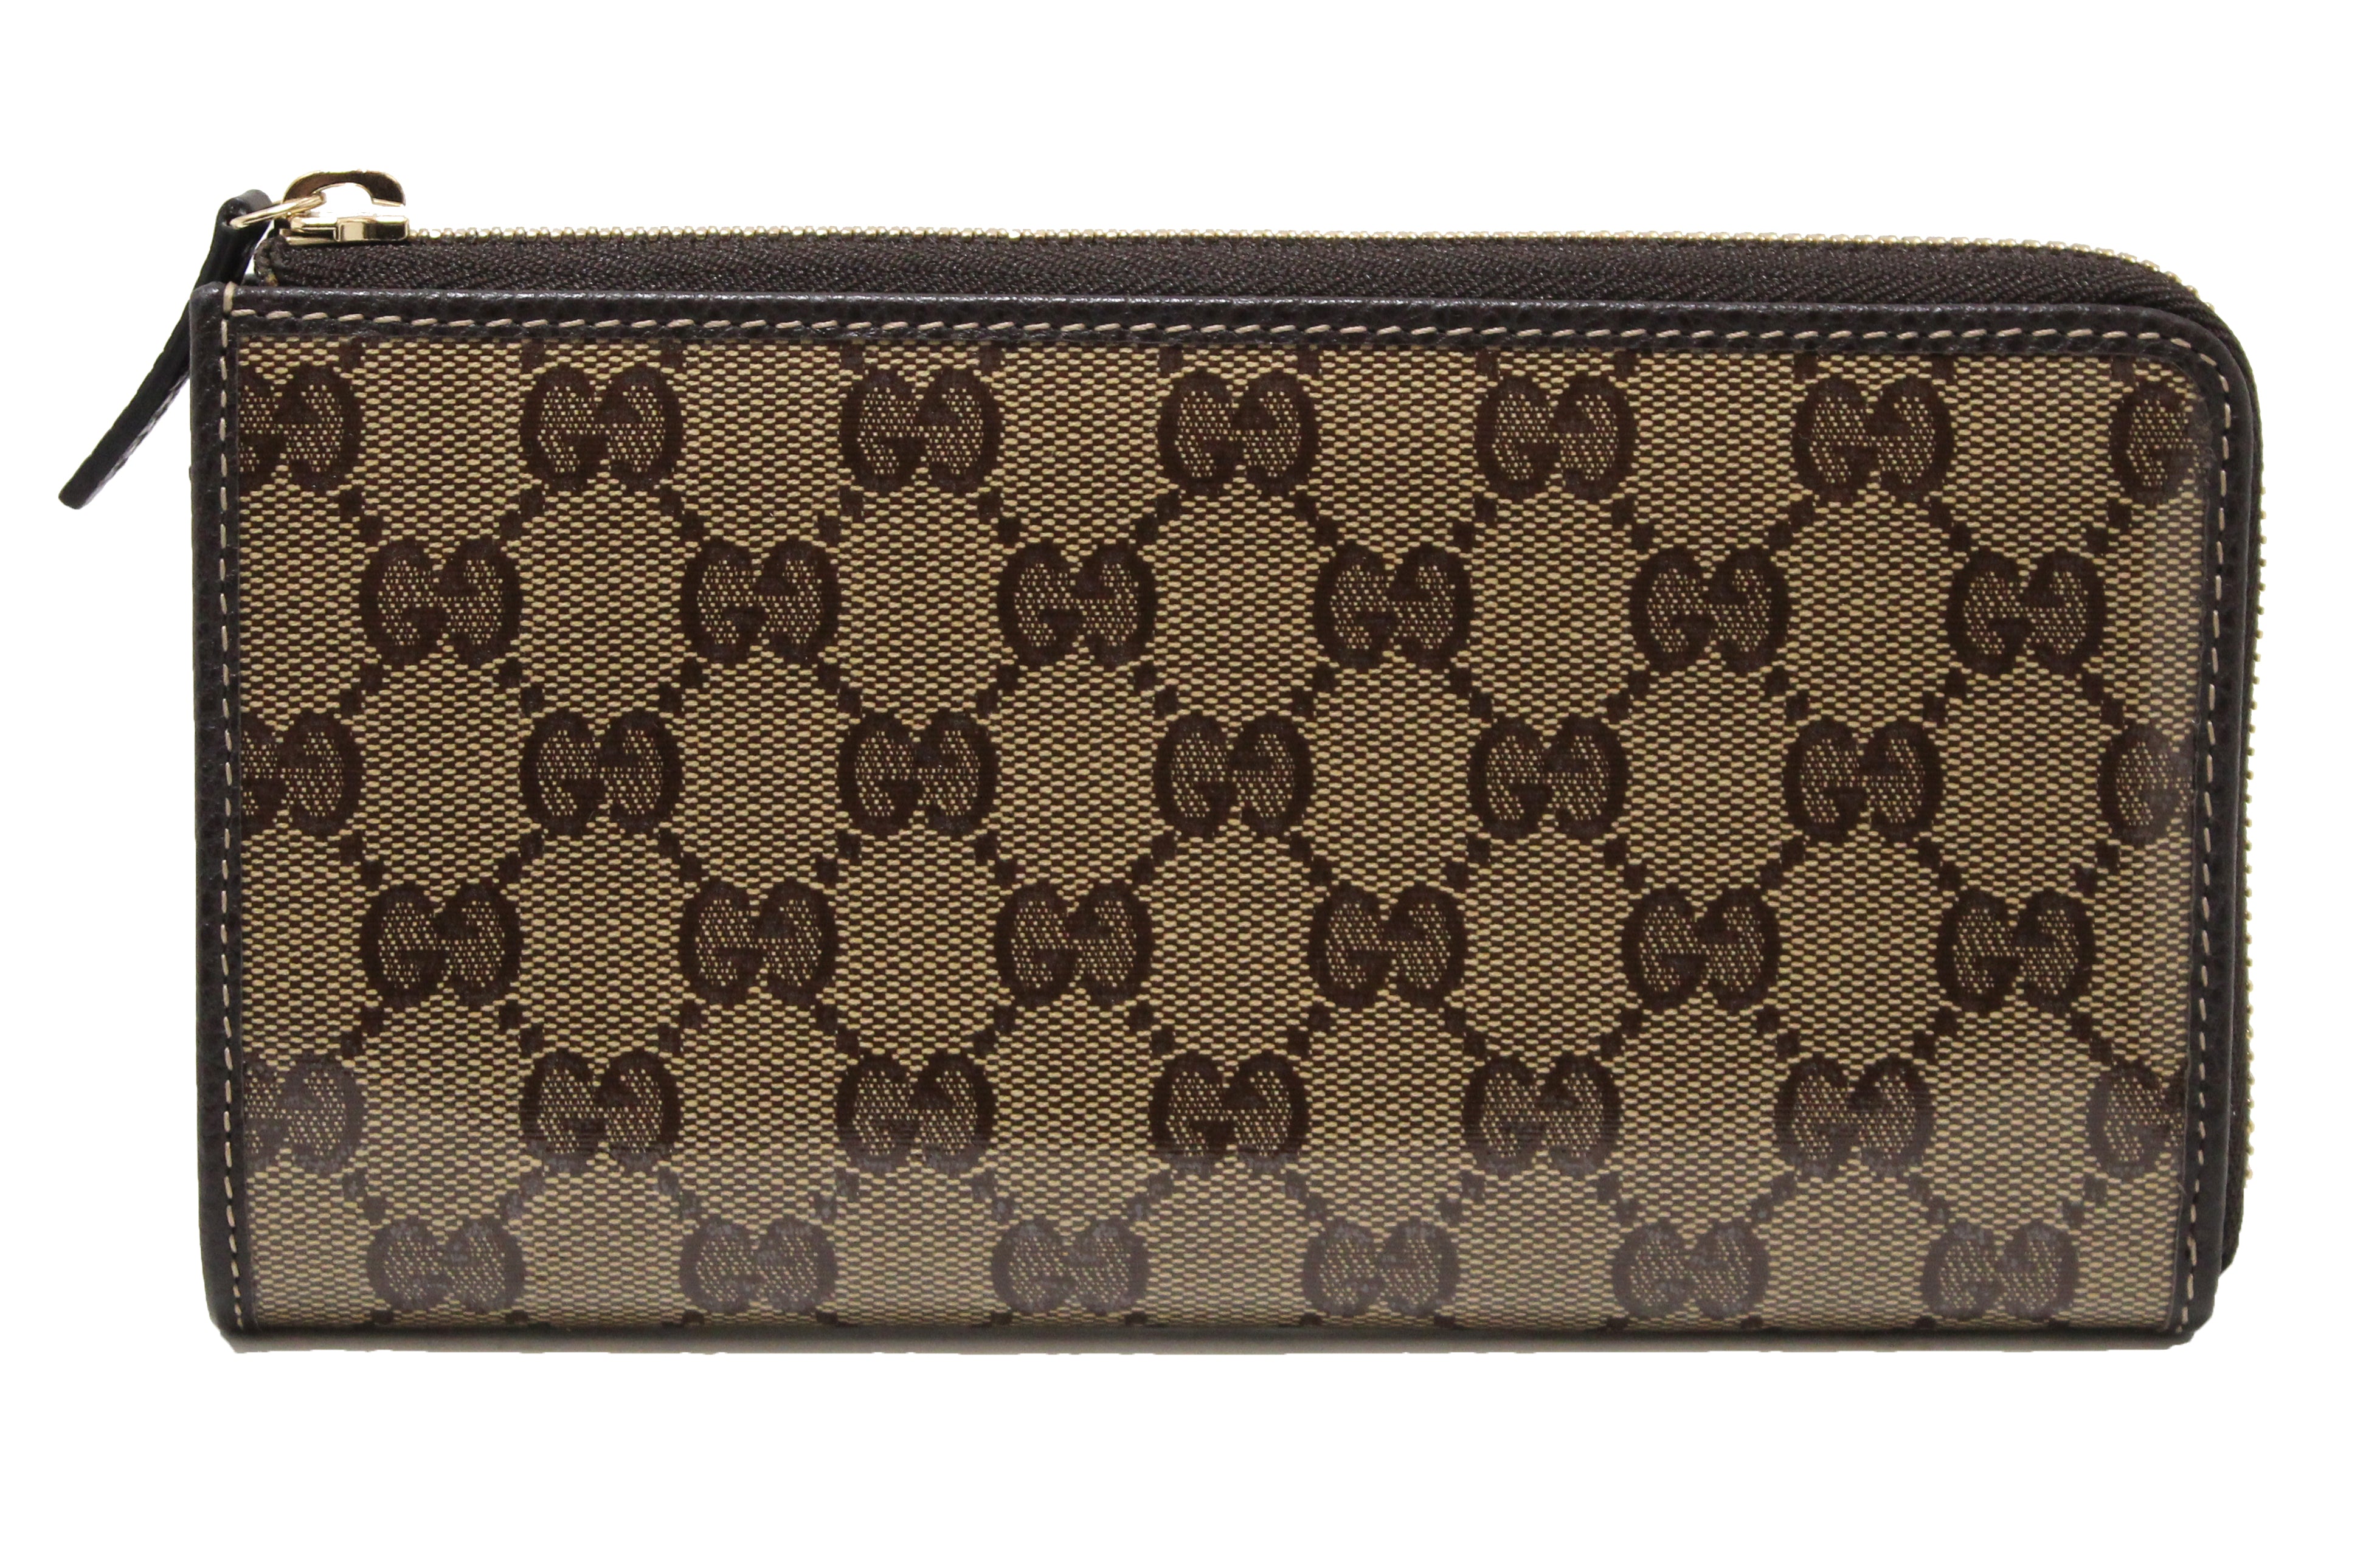 Authentic NEW Gucci Brown GG Crystal Coated Canvas Zippy Wallet